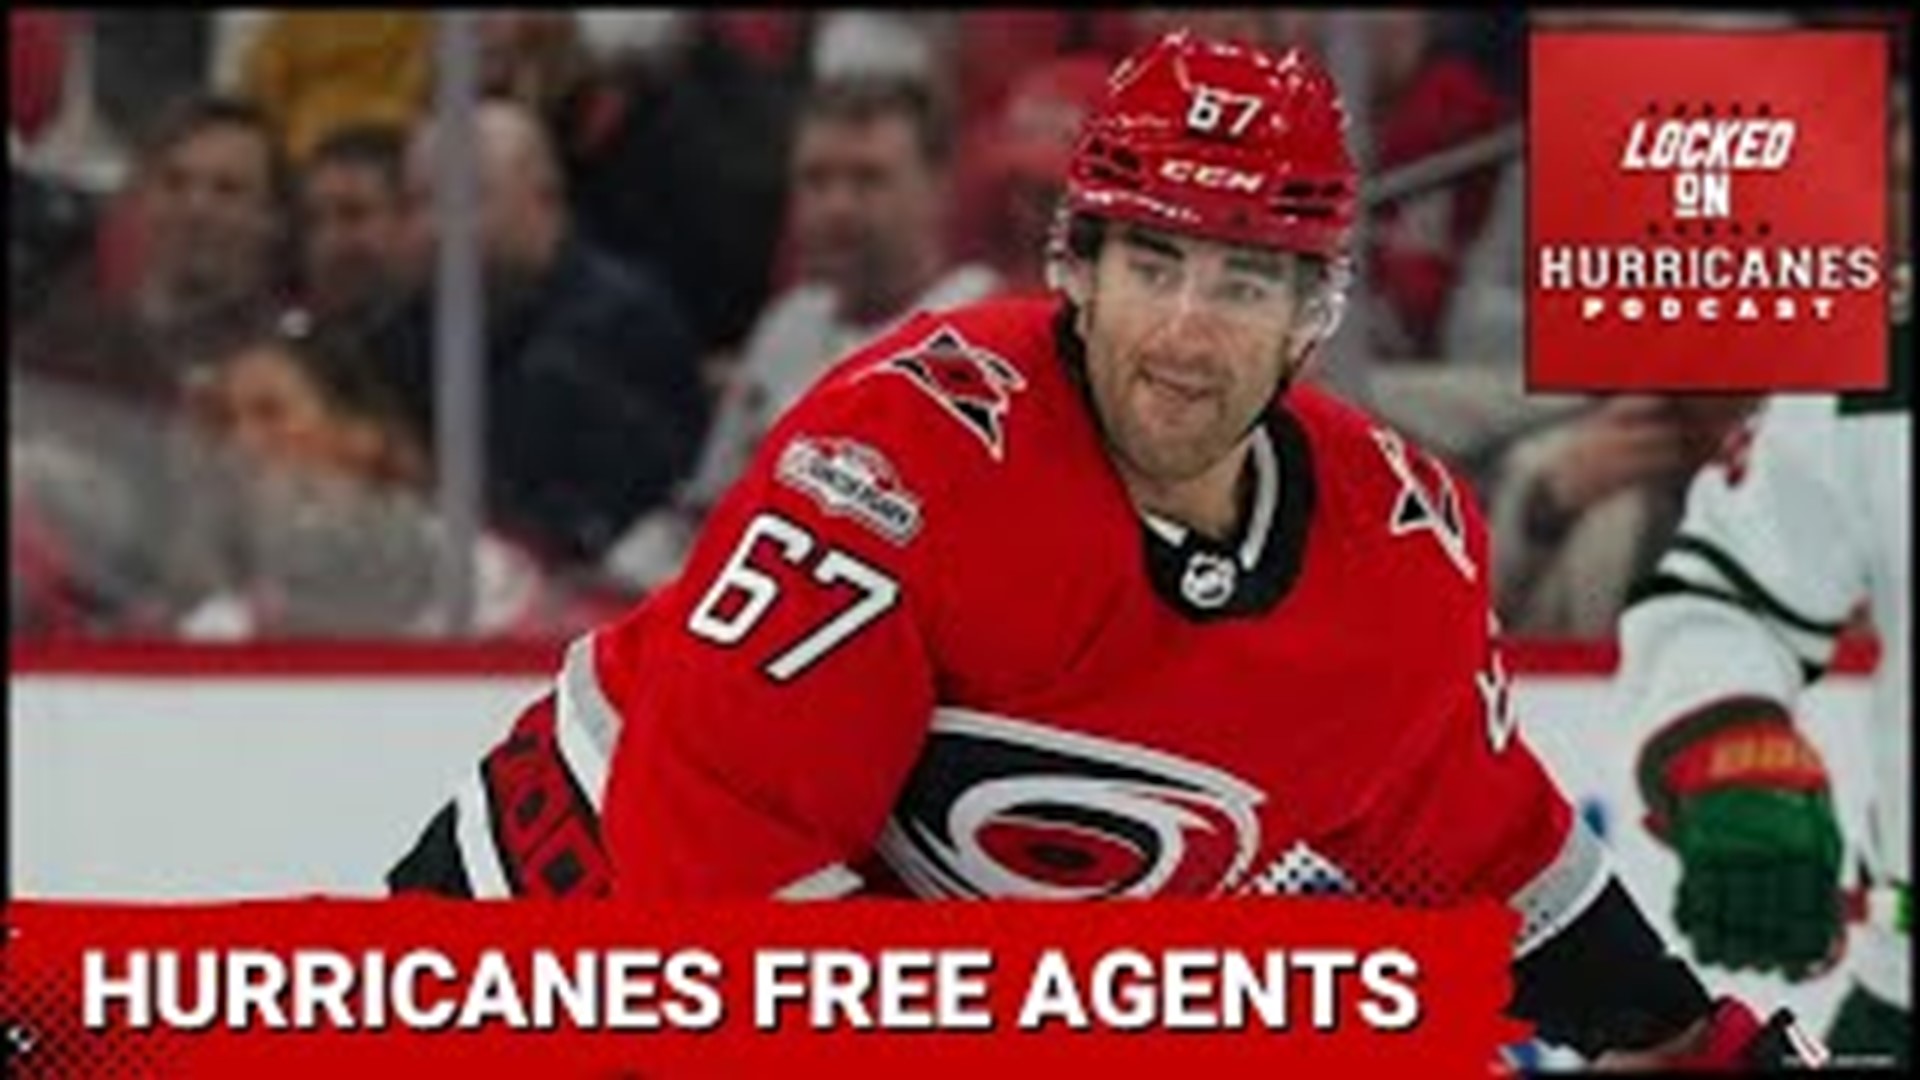 What sort of contract extensions should those who return be given? That and more on Locked On Hurricanes.